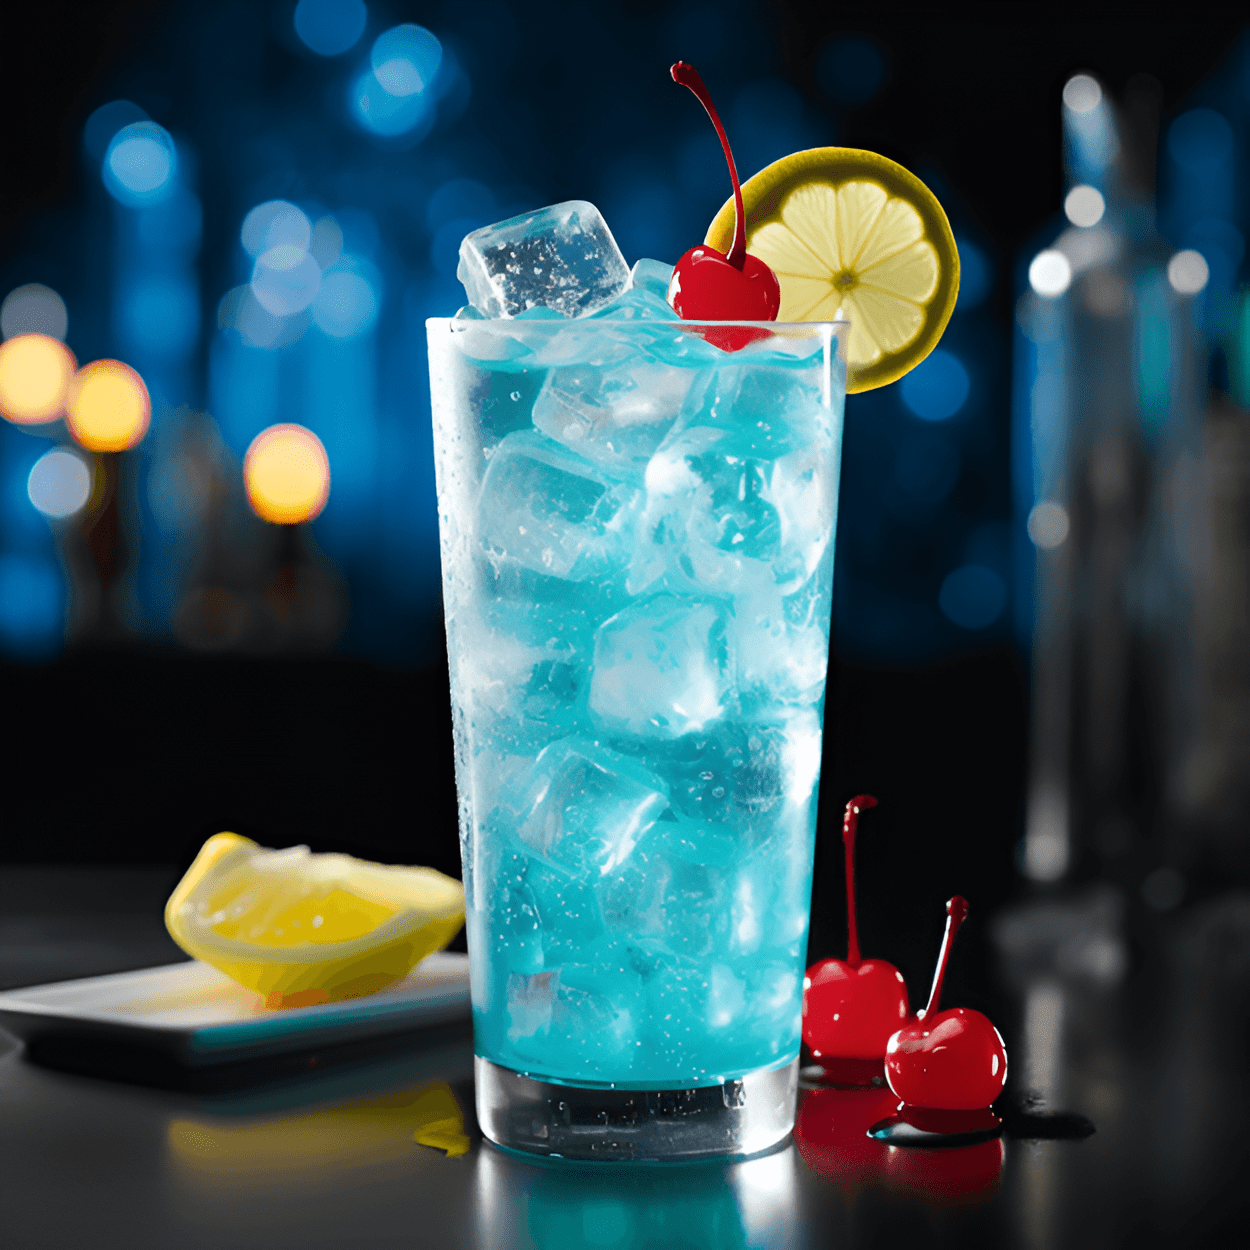 Blue Frog Cocktail Recipe - The Blue Frog cocktail is a sweet and tangy drink with a strong citrus flavor. It has a refreshing, tropical taste that is balanced by the sharpness of the vodka. The blue curacao gives it a unique, fruity flavor that is both exotic and inviting.